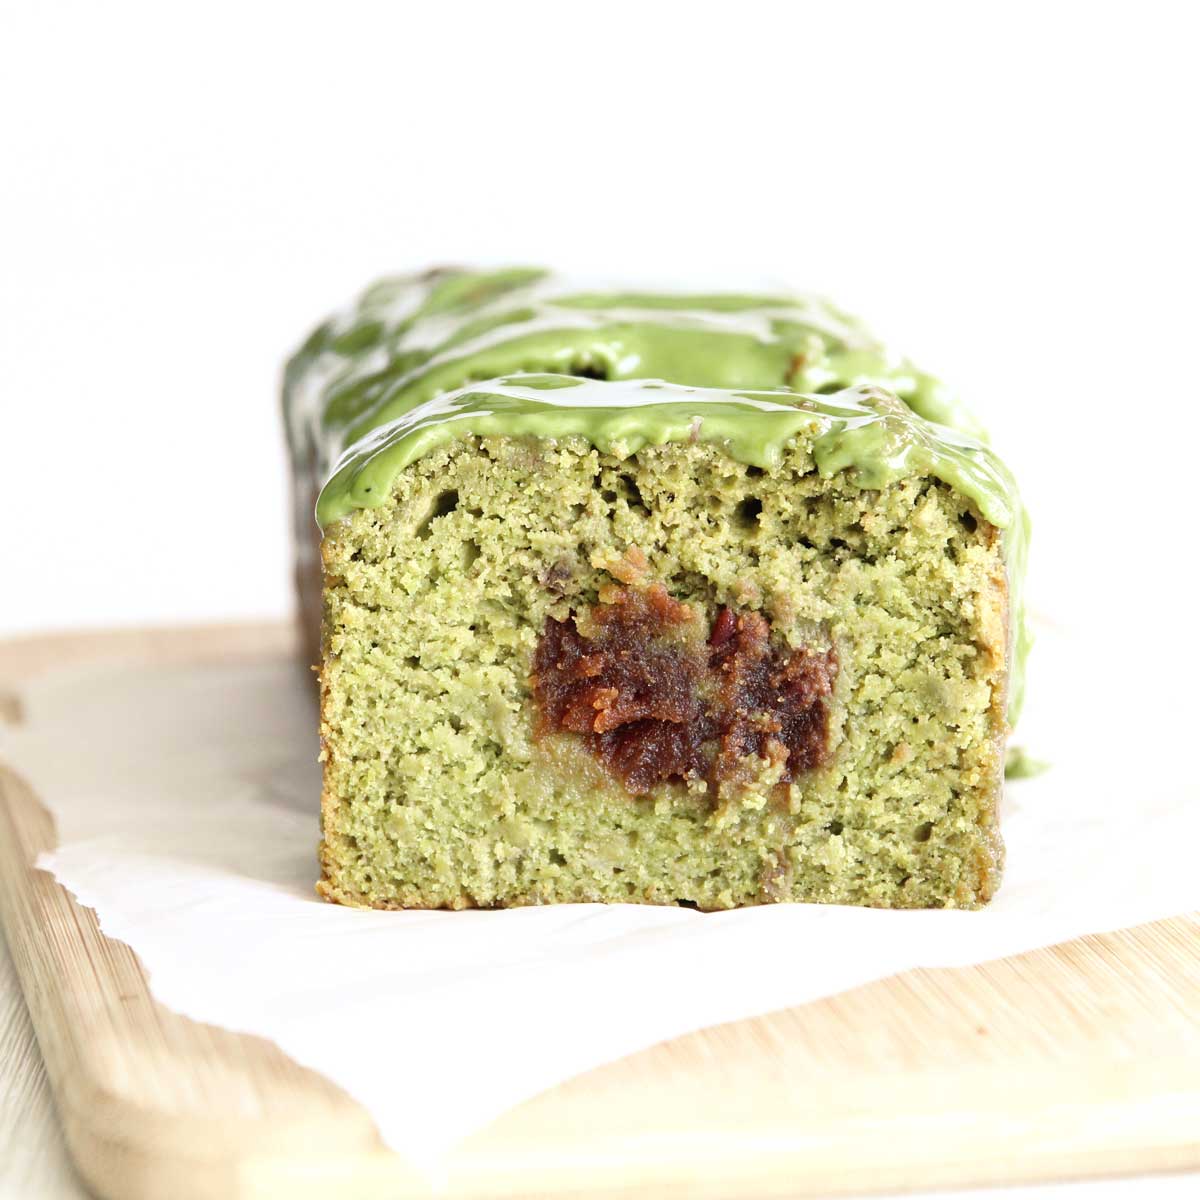 How to Make Matcha Banana Bread with Red Bean Paste Filling - Red Bean Mochi Cake